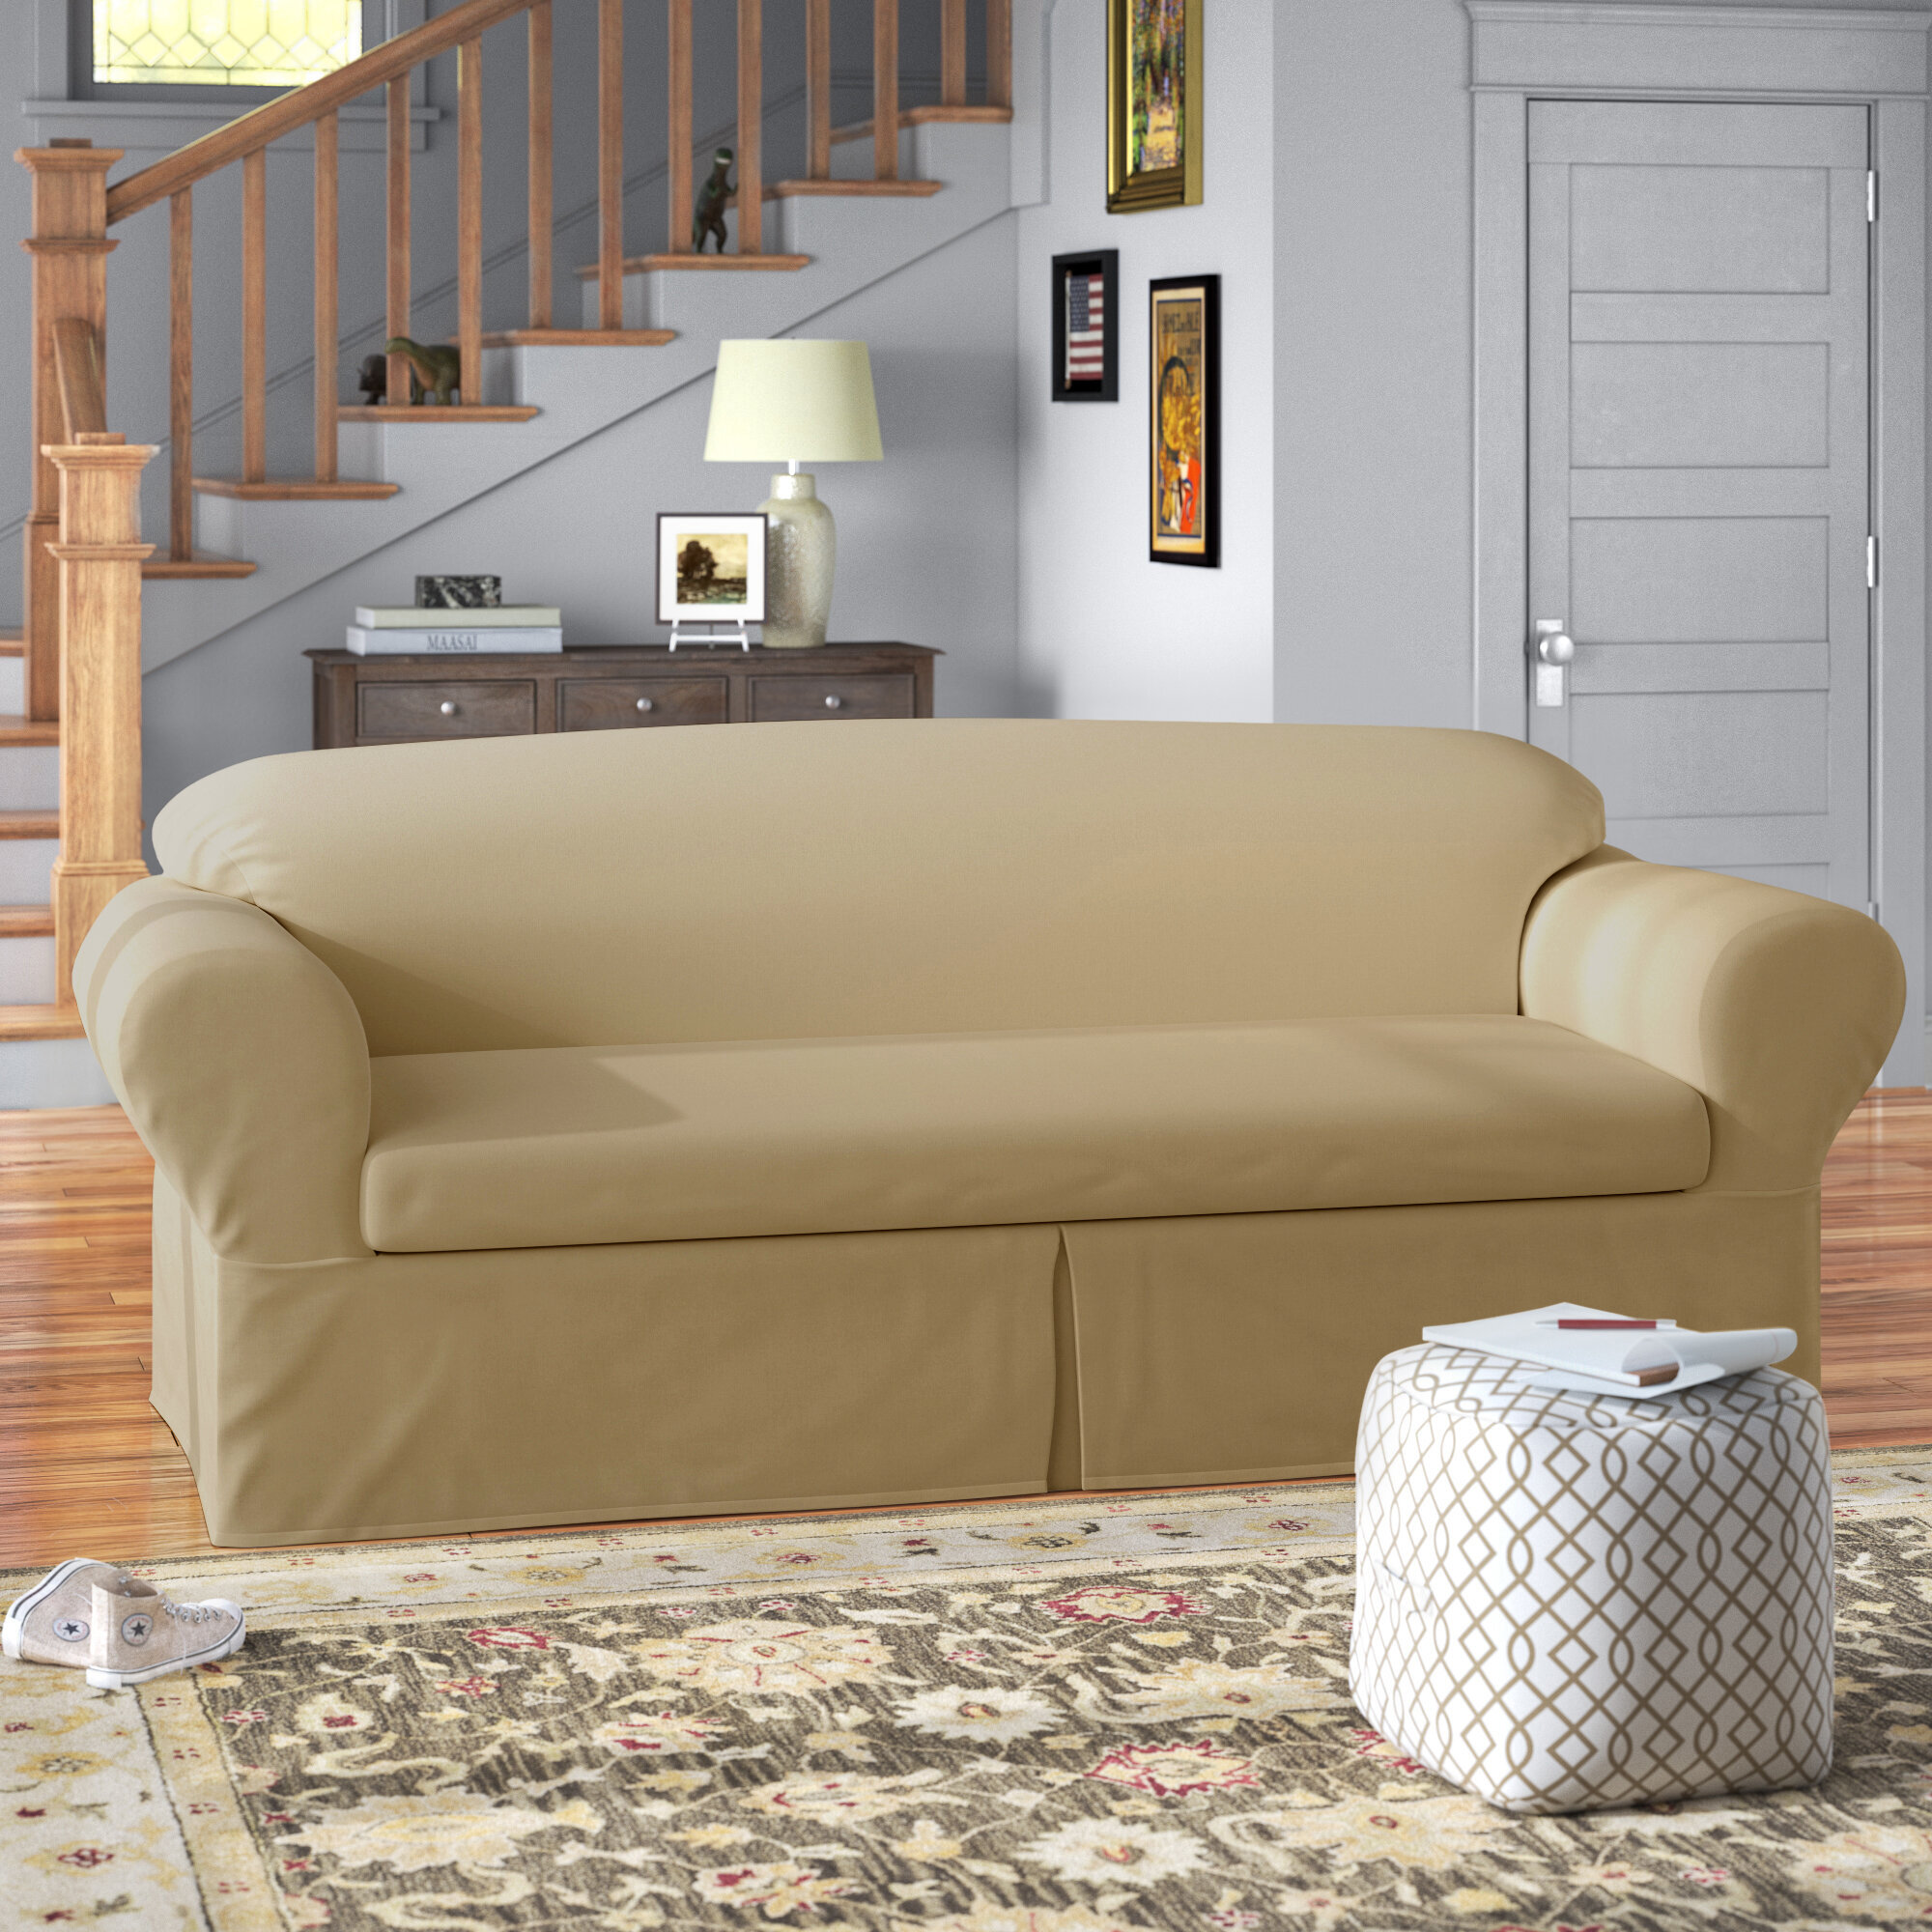 Details about   Modern Solid 1/2/3/4 Seater Slipcover Sofa Cover Sweater Couch Cover Home Decor 